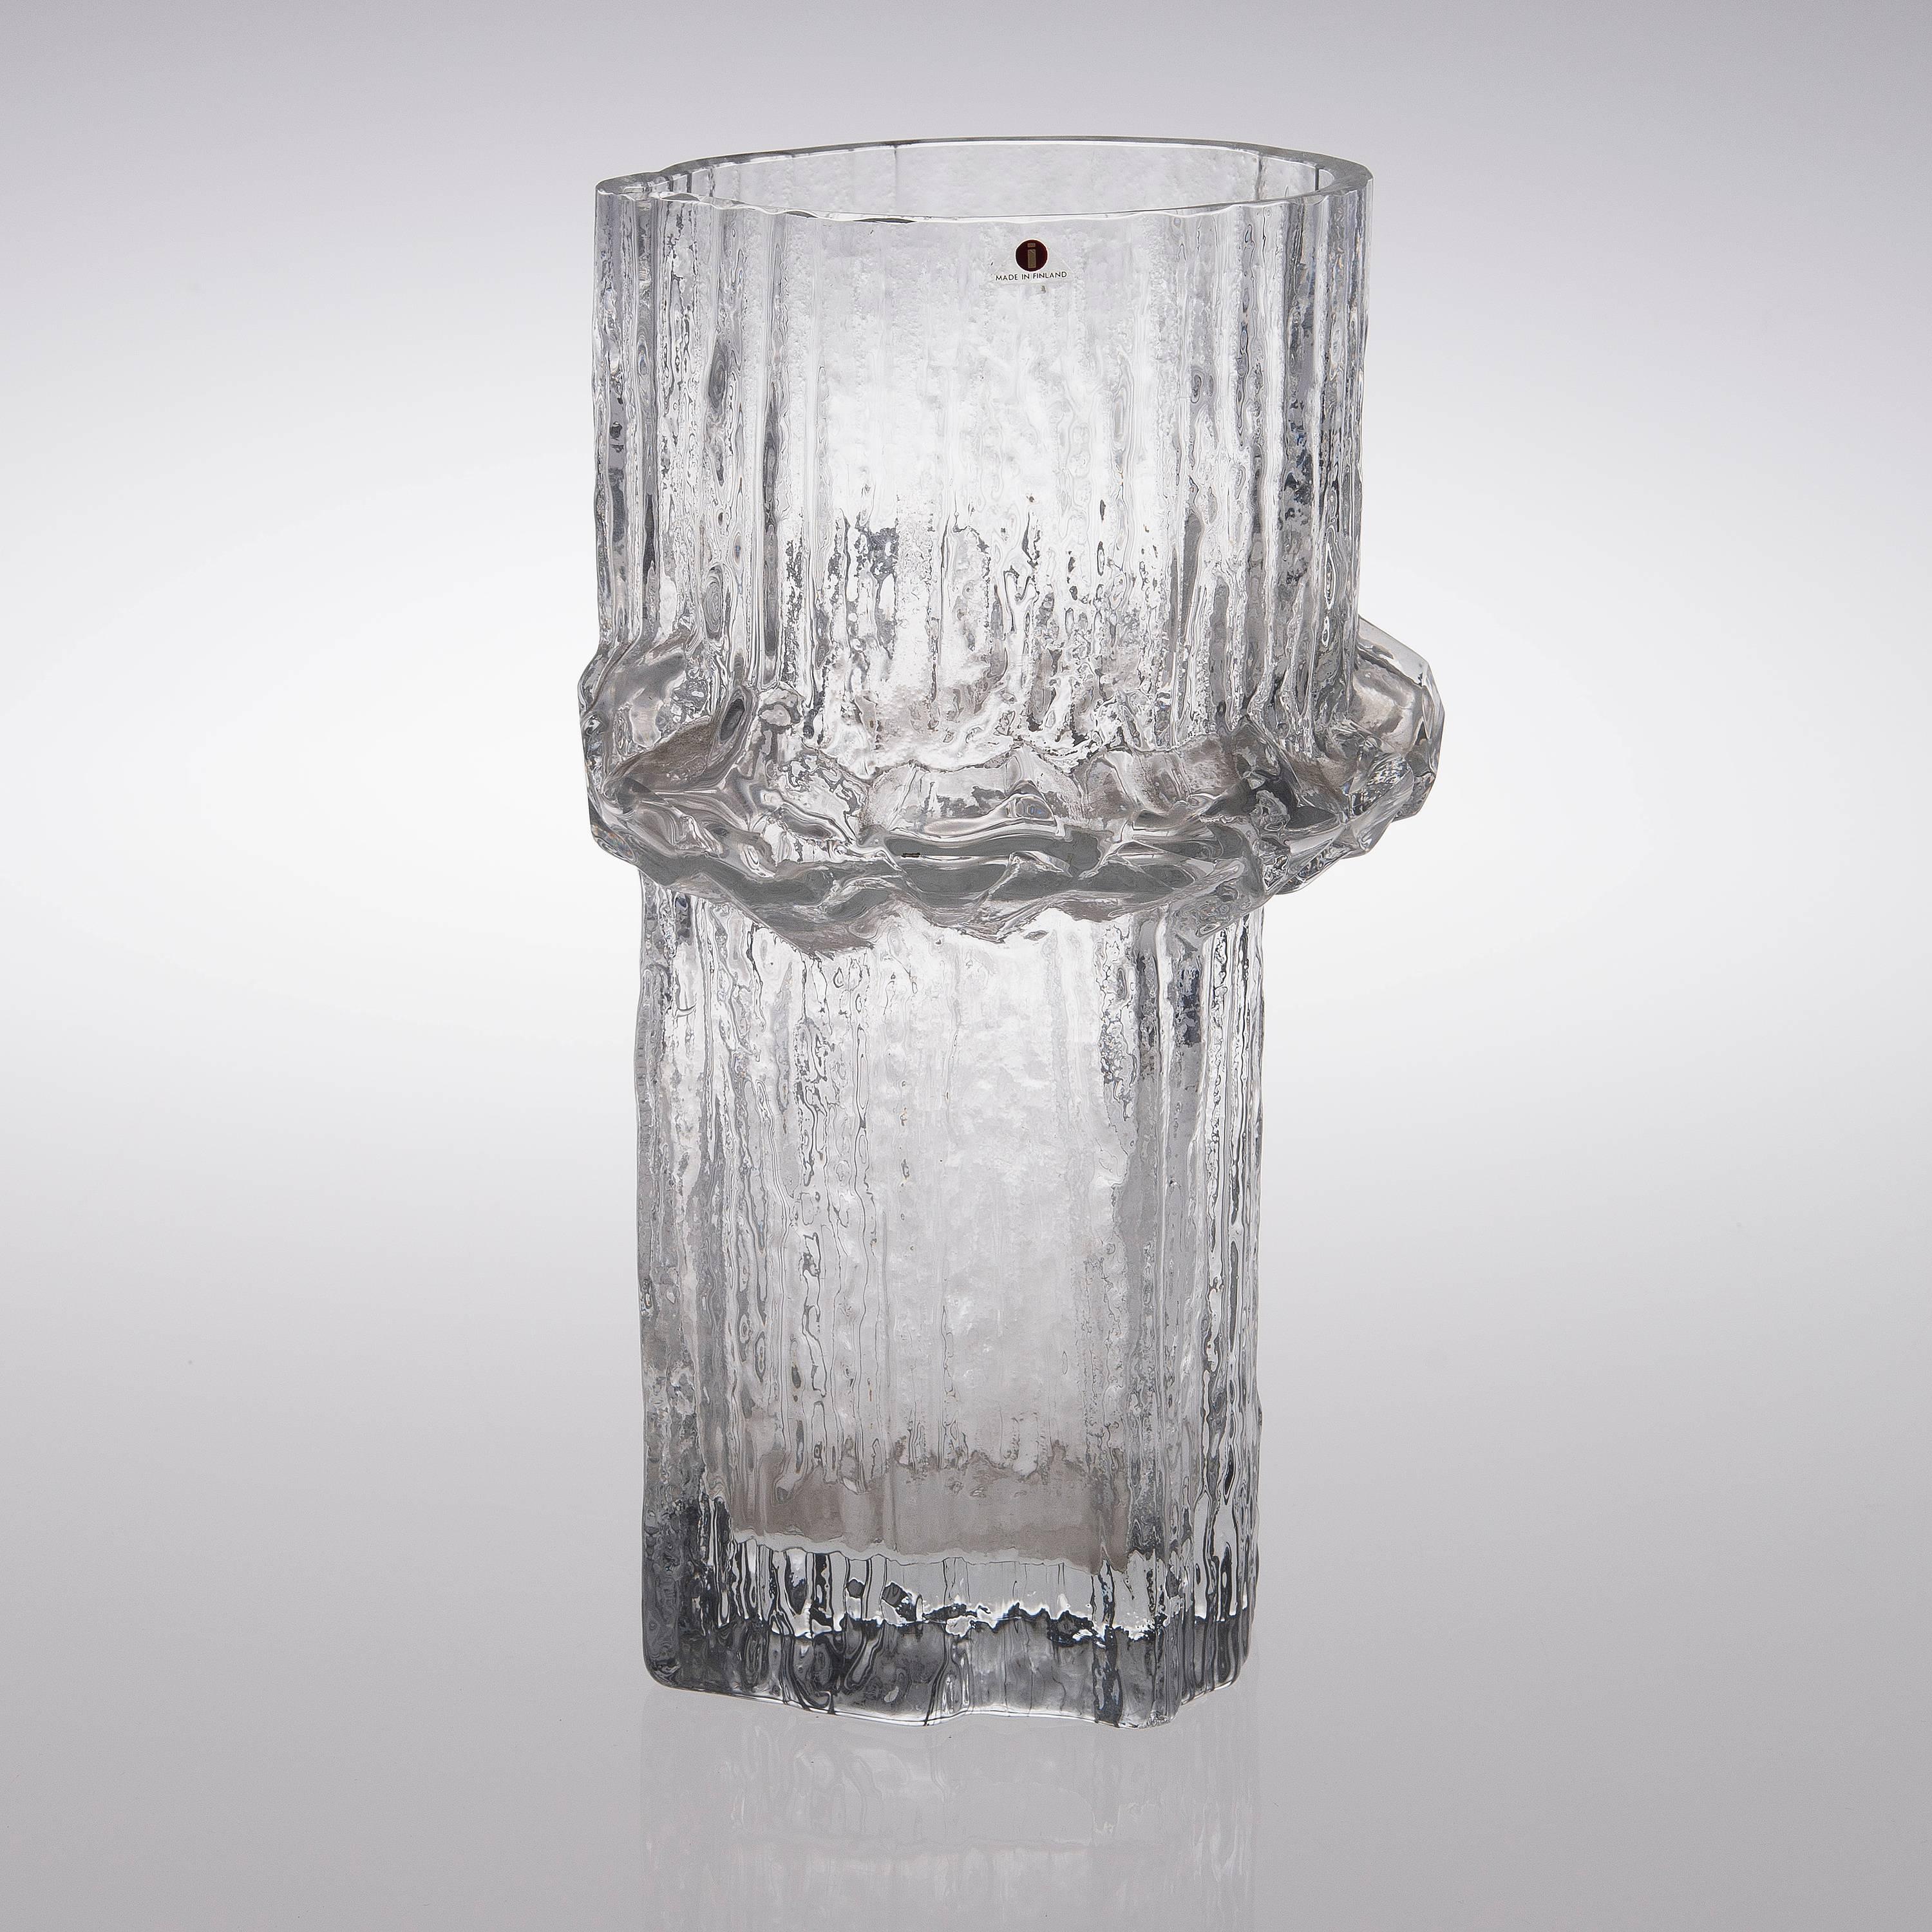 Rare vase designed by Tapio Wirkkala.
Manufactured by Iittala, circa 1970.
Clear molded glass. 
Signature incised, retains original label.